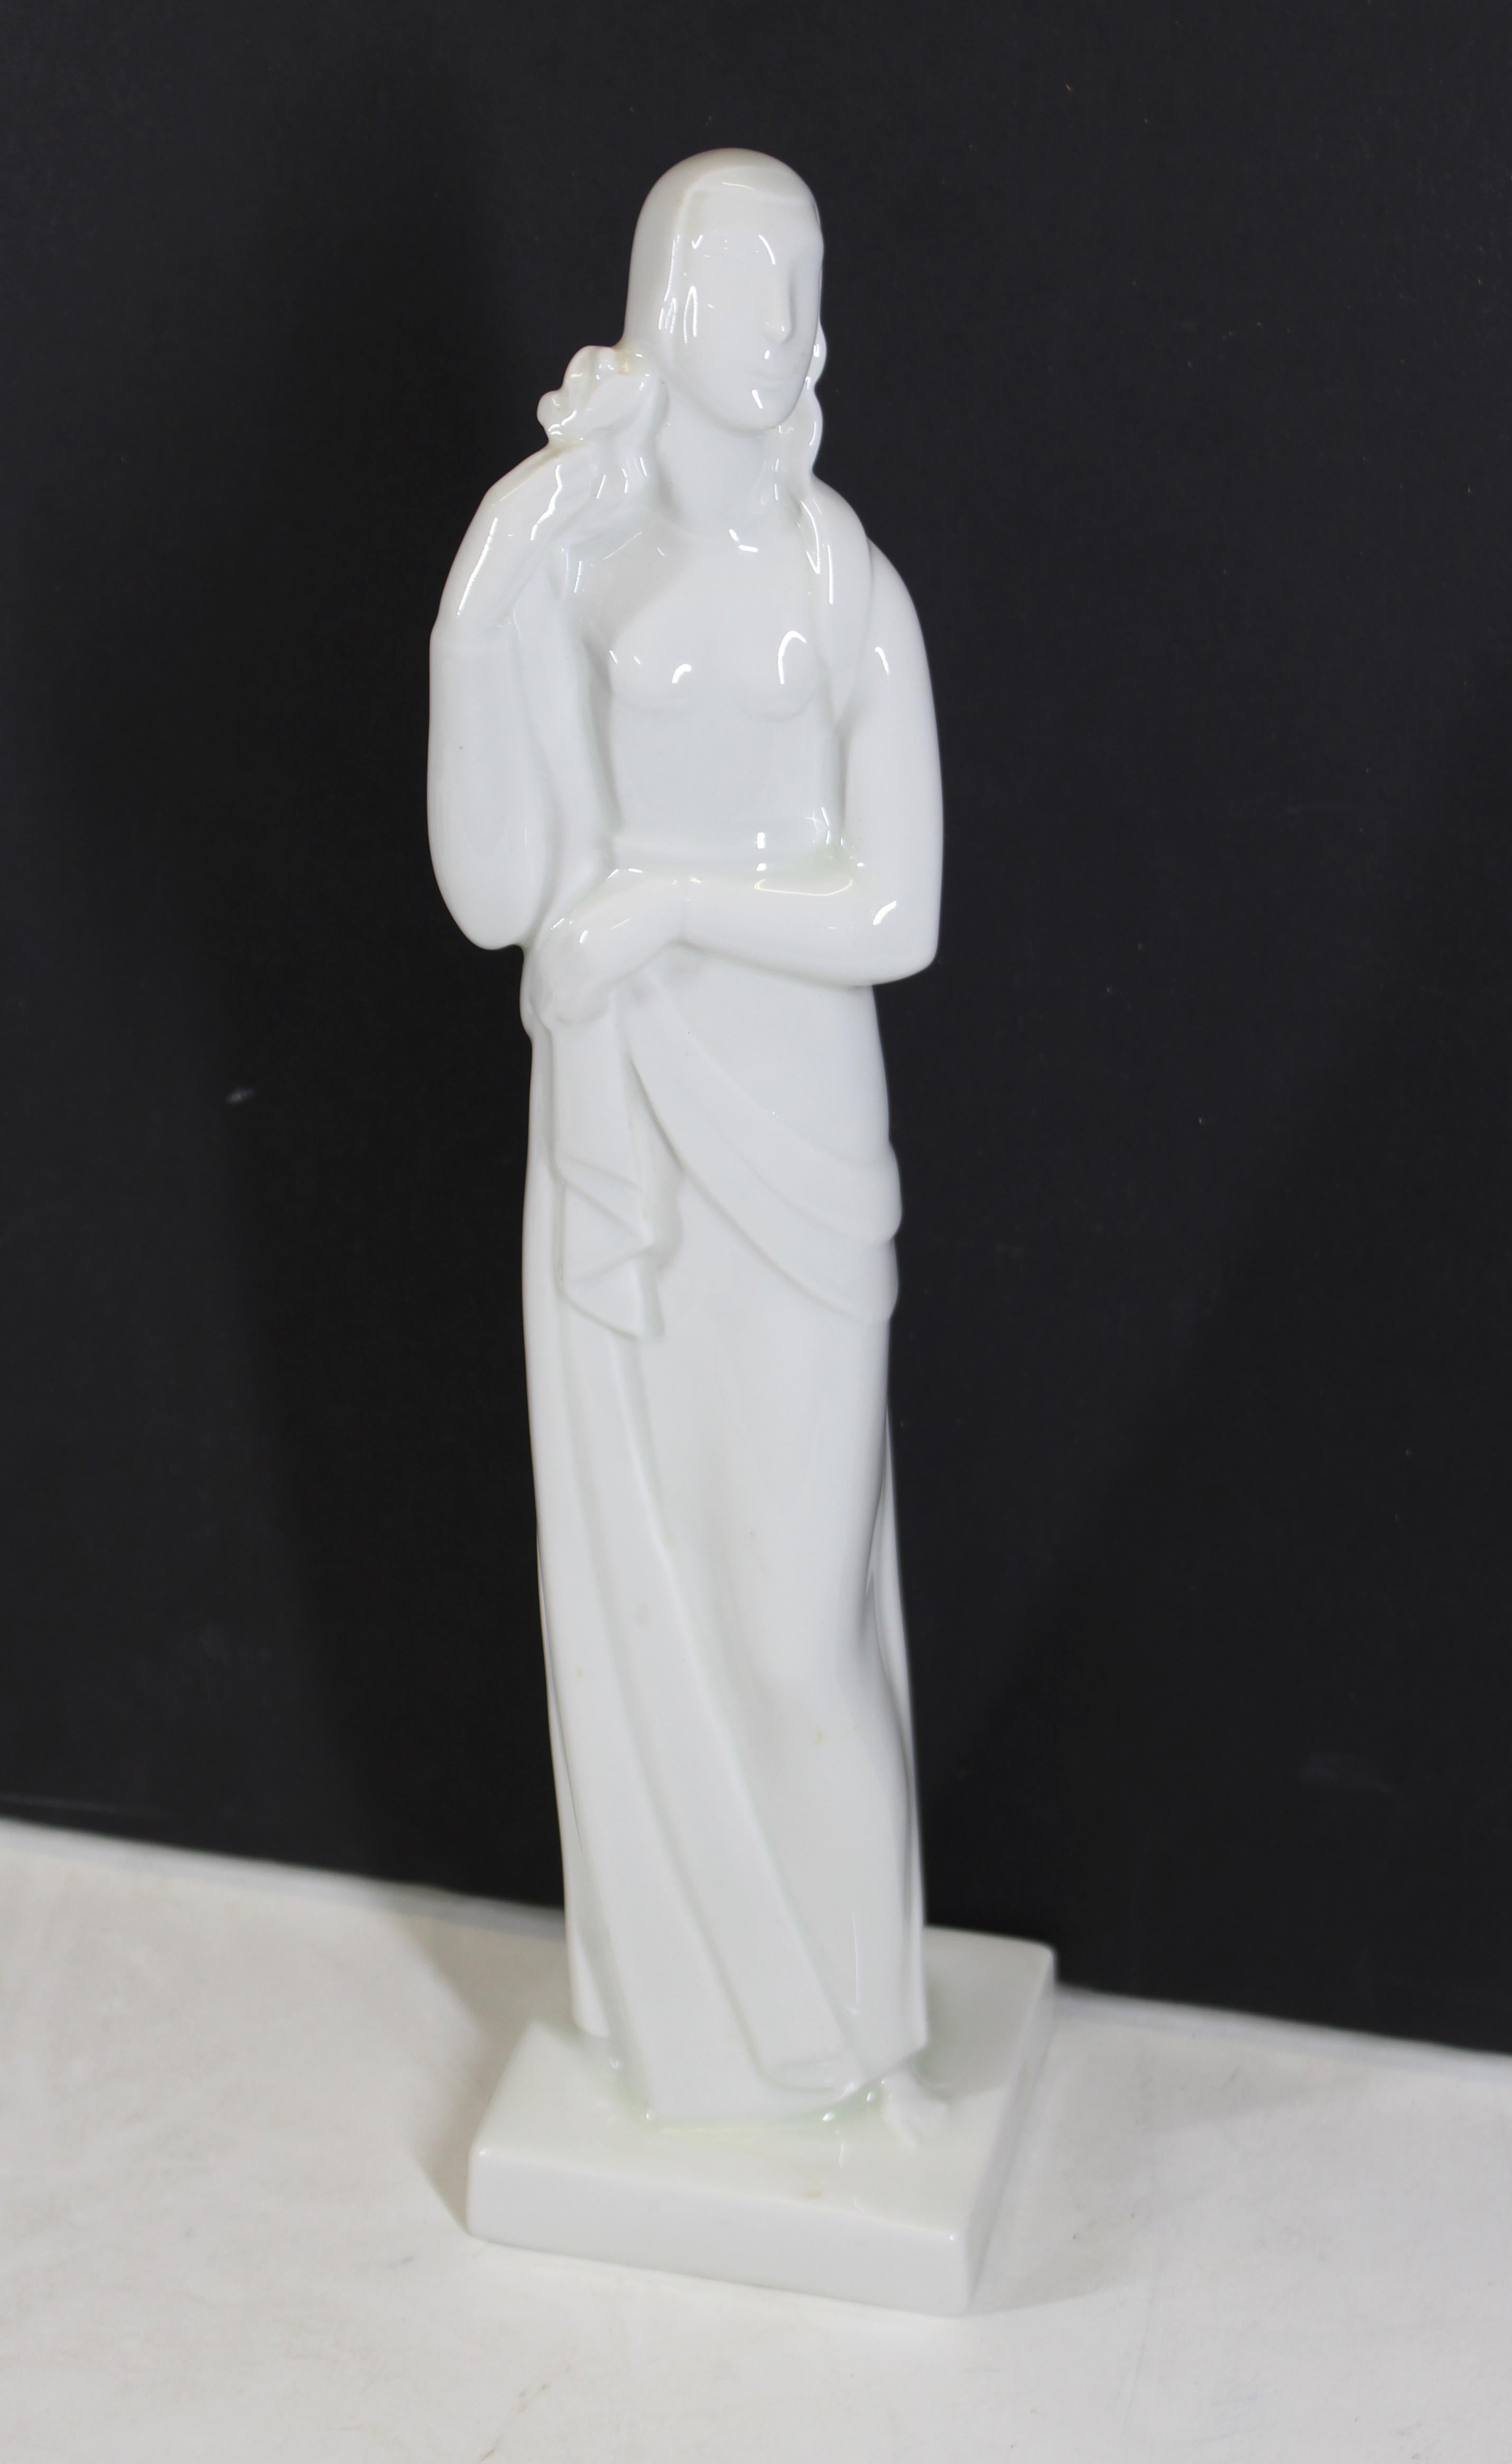 American Art Deco period rare glazed white porcelain figure of a standing woman, designed by famed ceramicist Geza De Vegh for the Lamberton ceramic works in New Jersey during the 1930s. The piece depicts a woman holding an olive branch, likely an